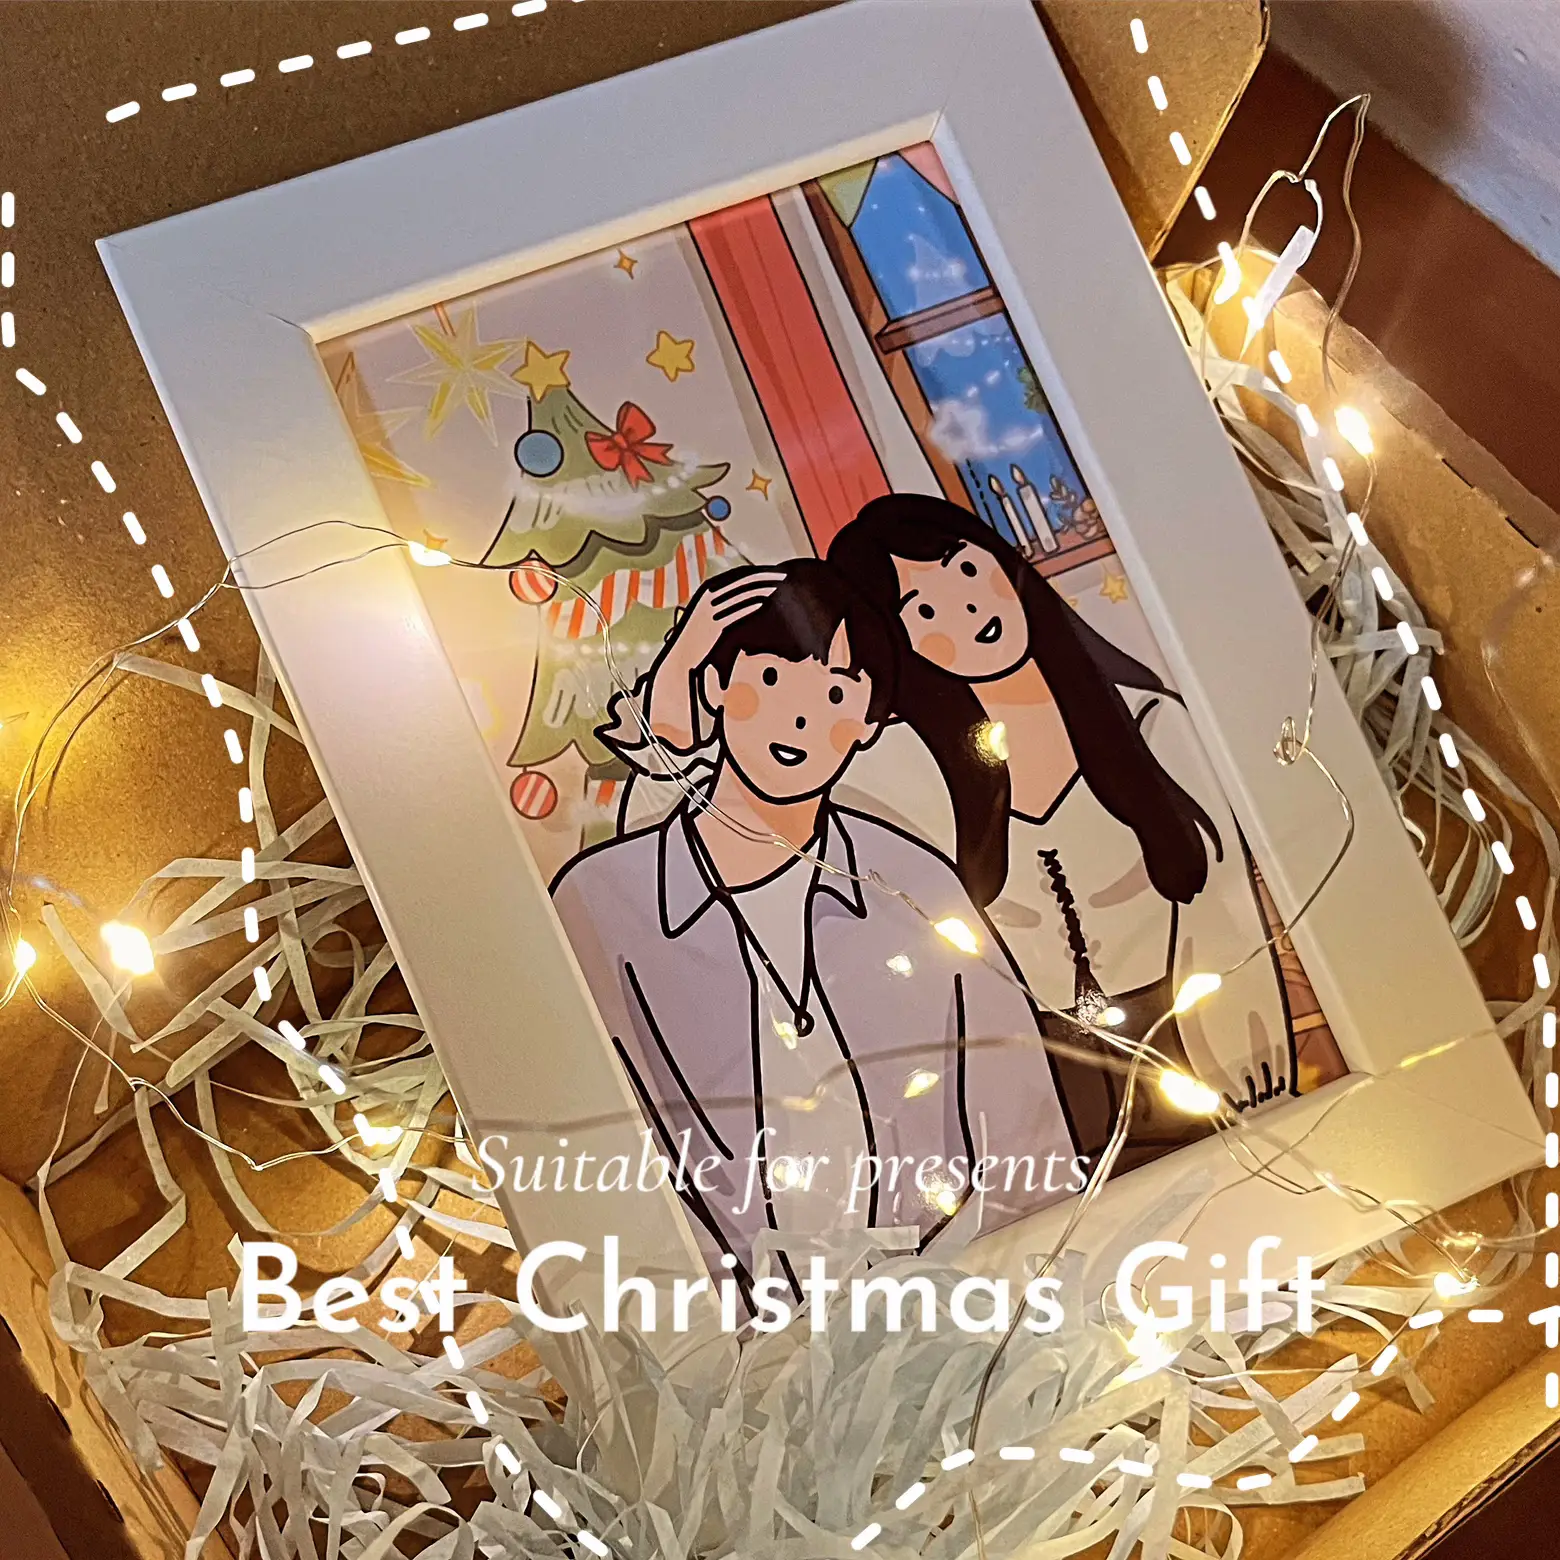 Boyfriend Christmas gift ideas, Gallery posted by ᰔᩚ